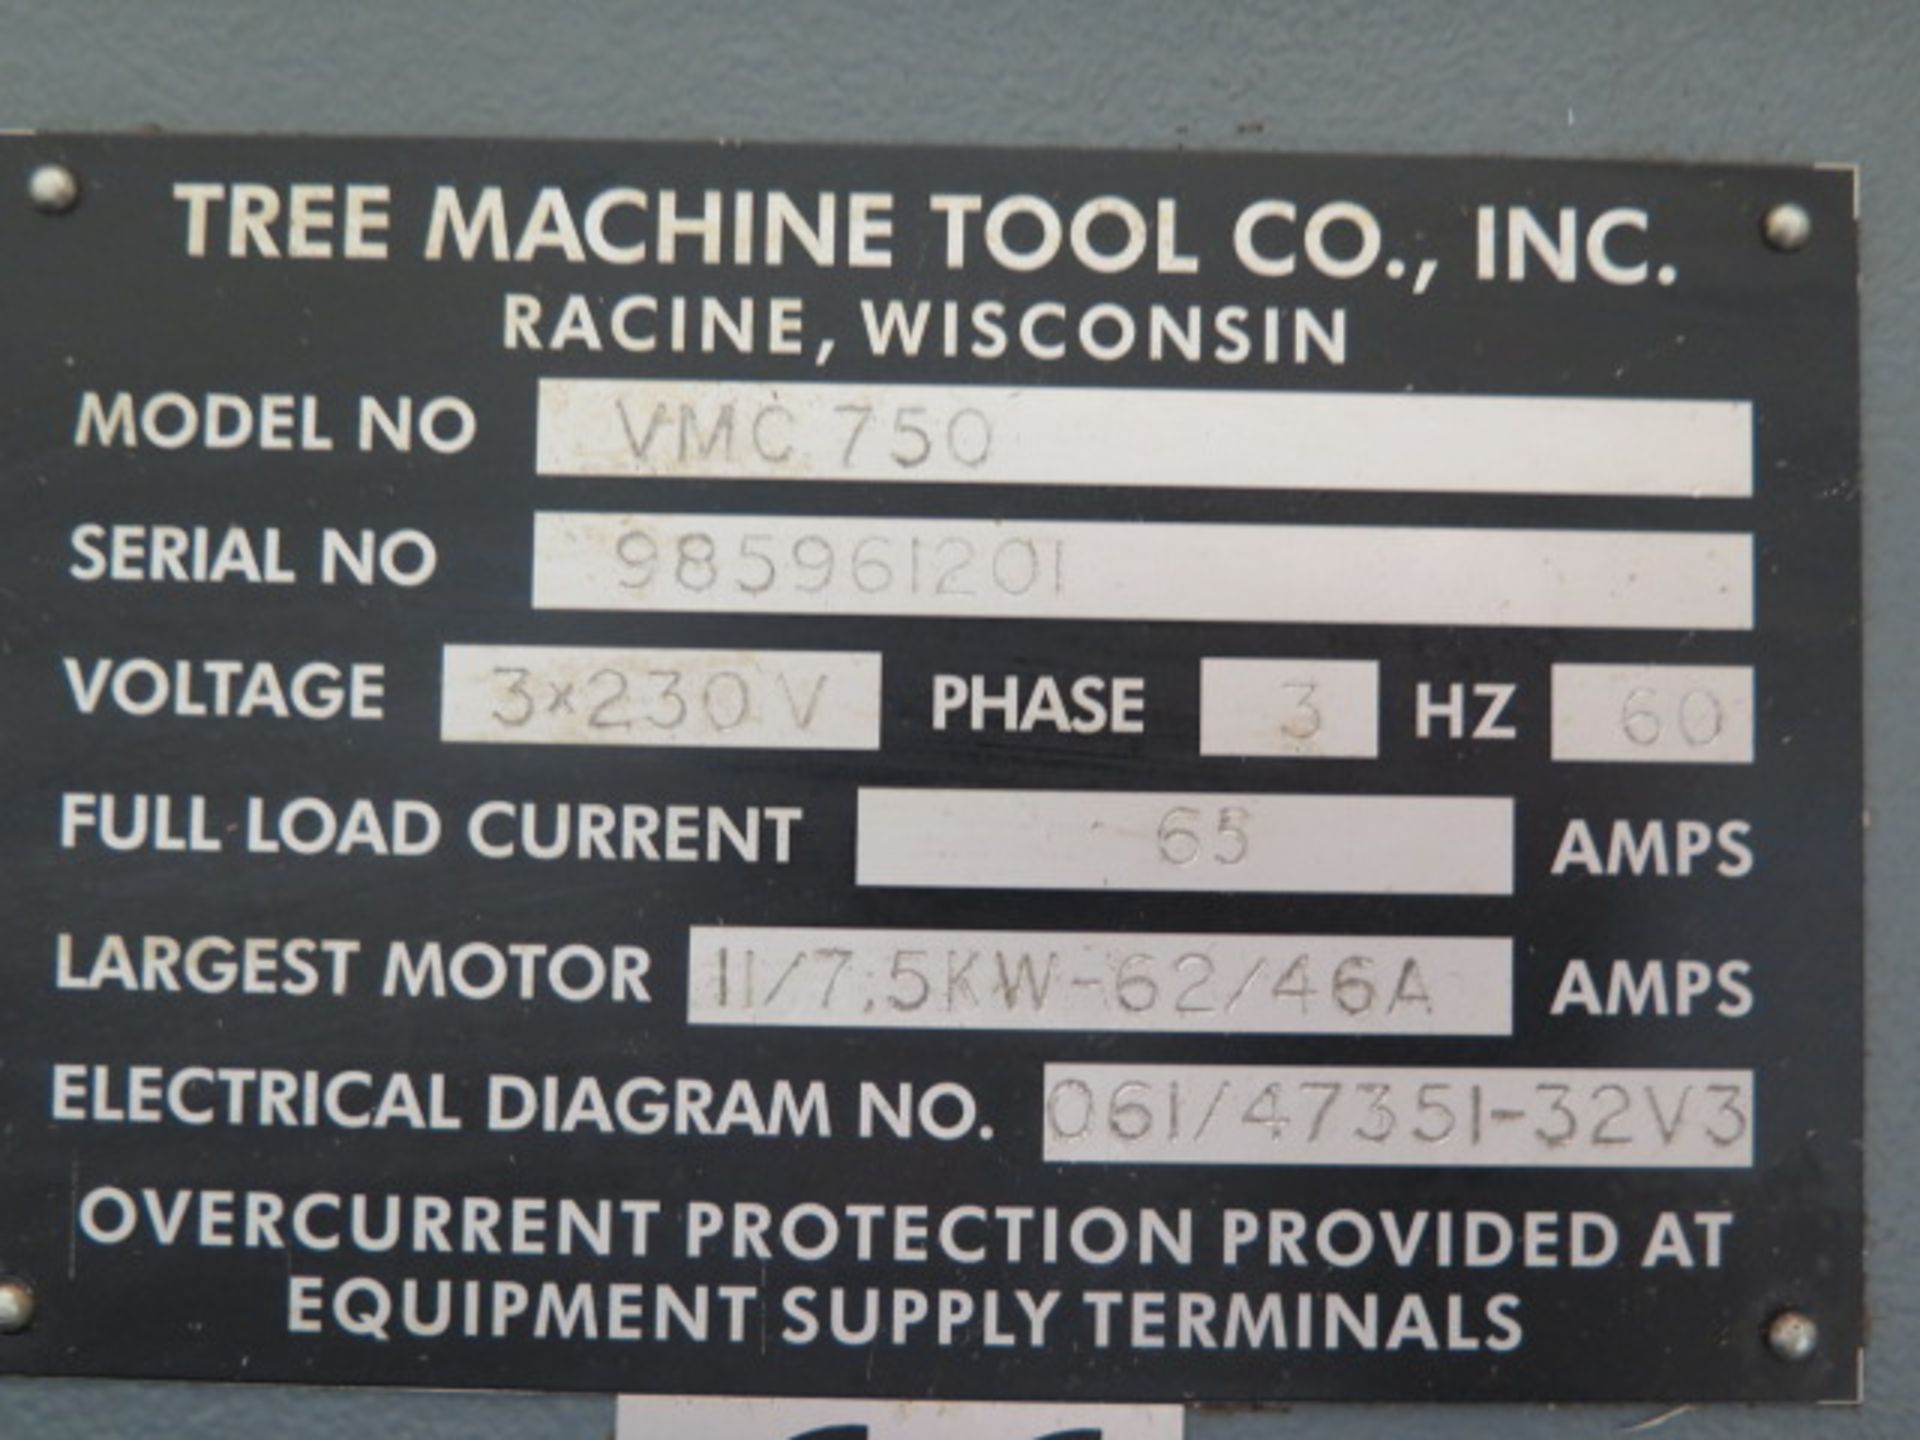 Tree / MAS VMC750 CNC Vertical Machining Center s/n 985961201 w/ Tree PC-2100 Controls, SOLD AS IS - Image 16 of 16